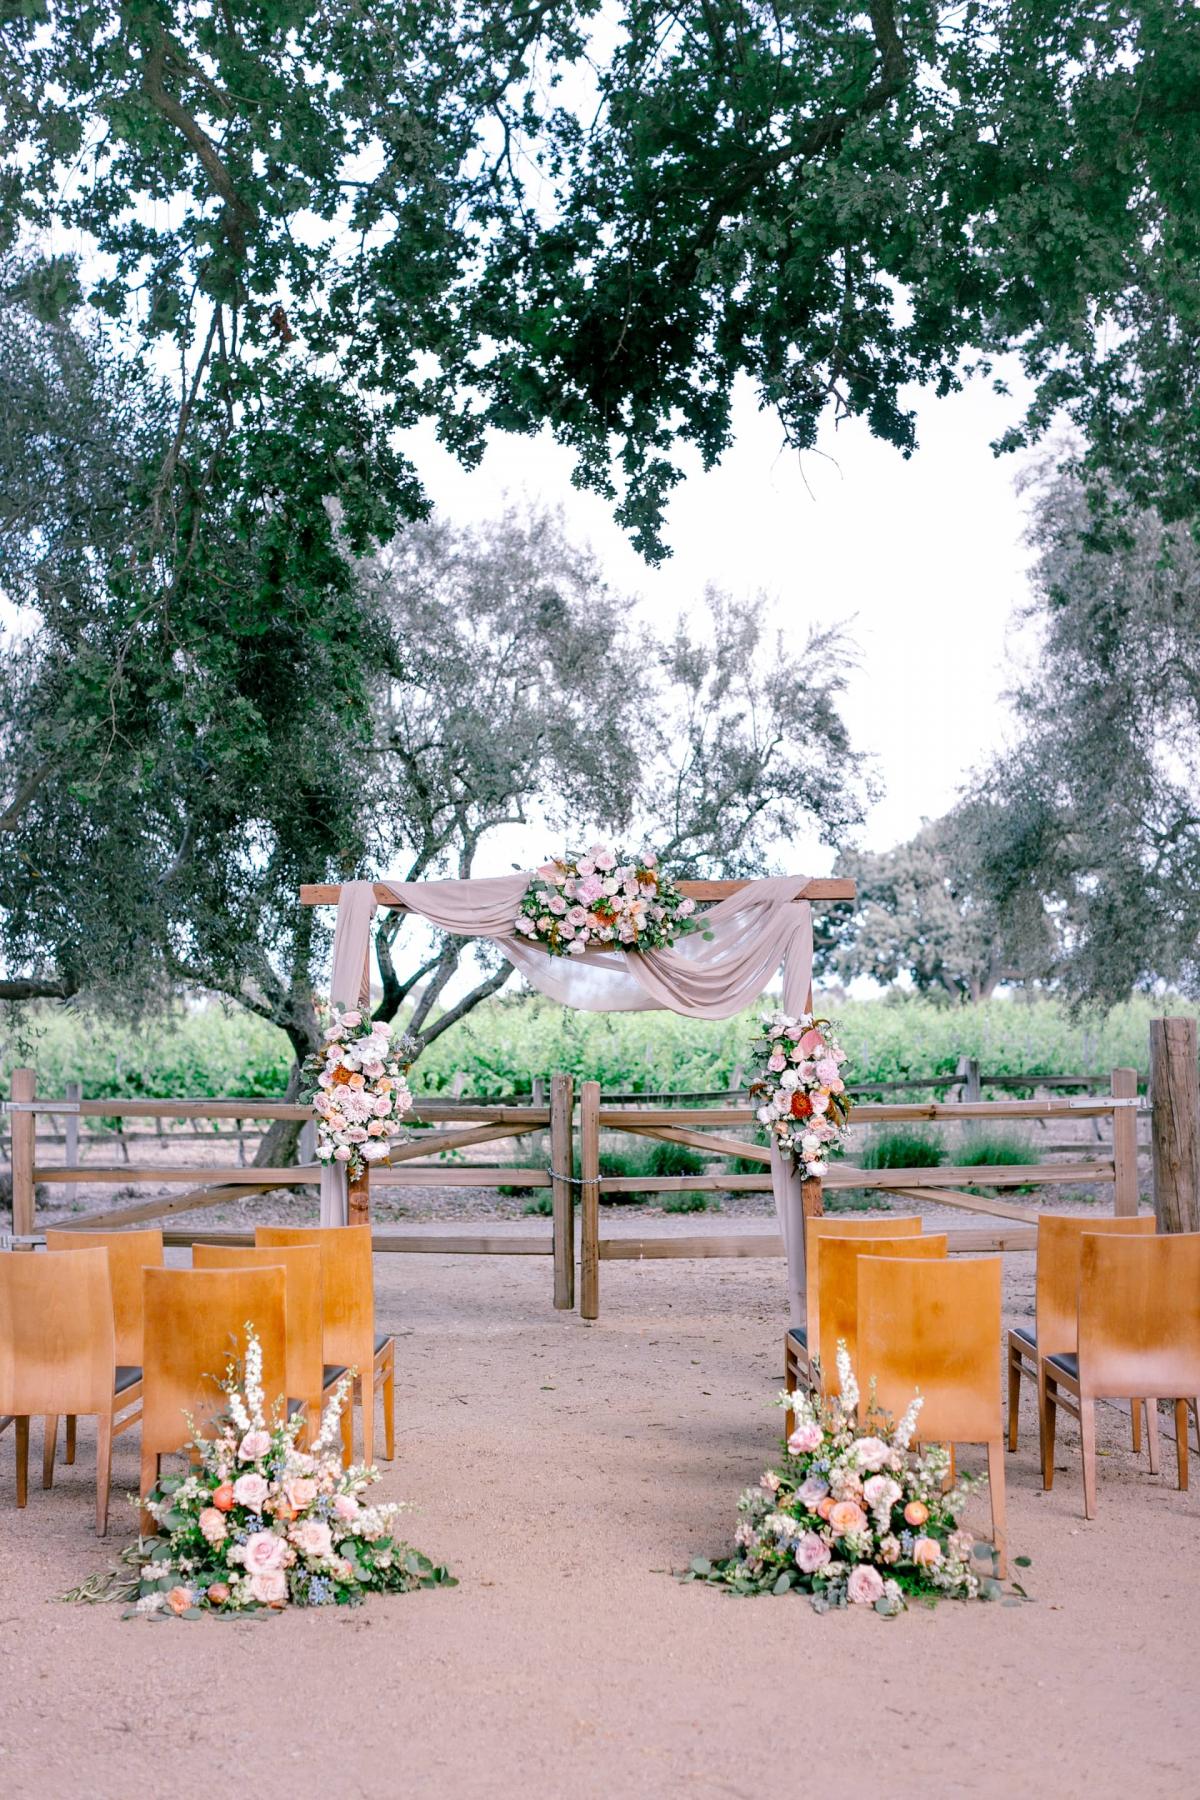 Outdoor Reception Area with Chairs, Flower Arrangements & Archway at Petros Winery